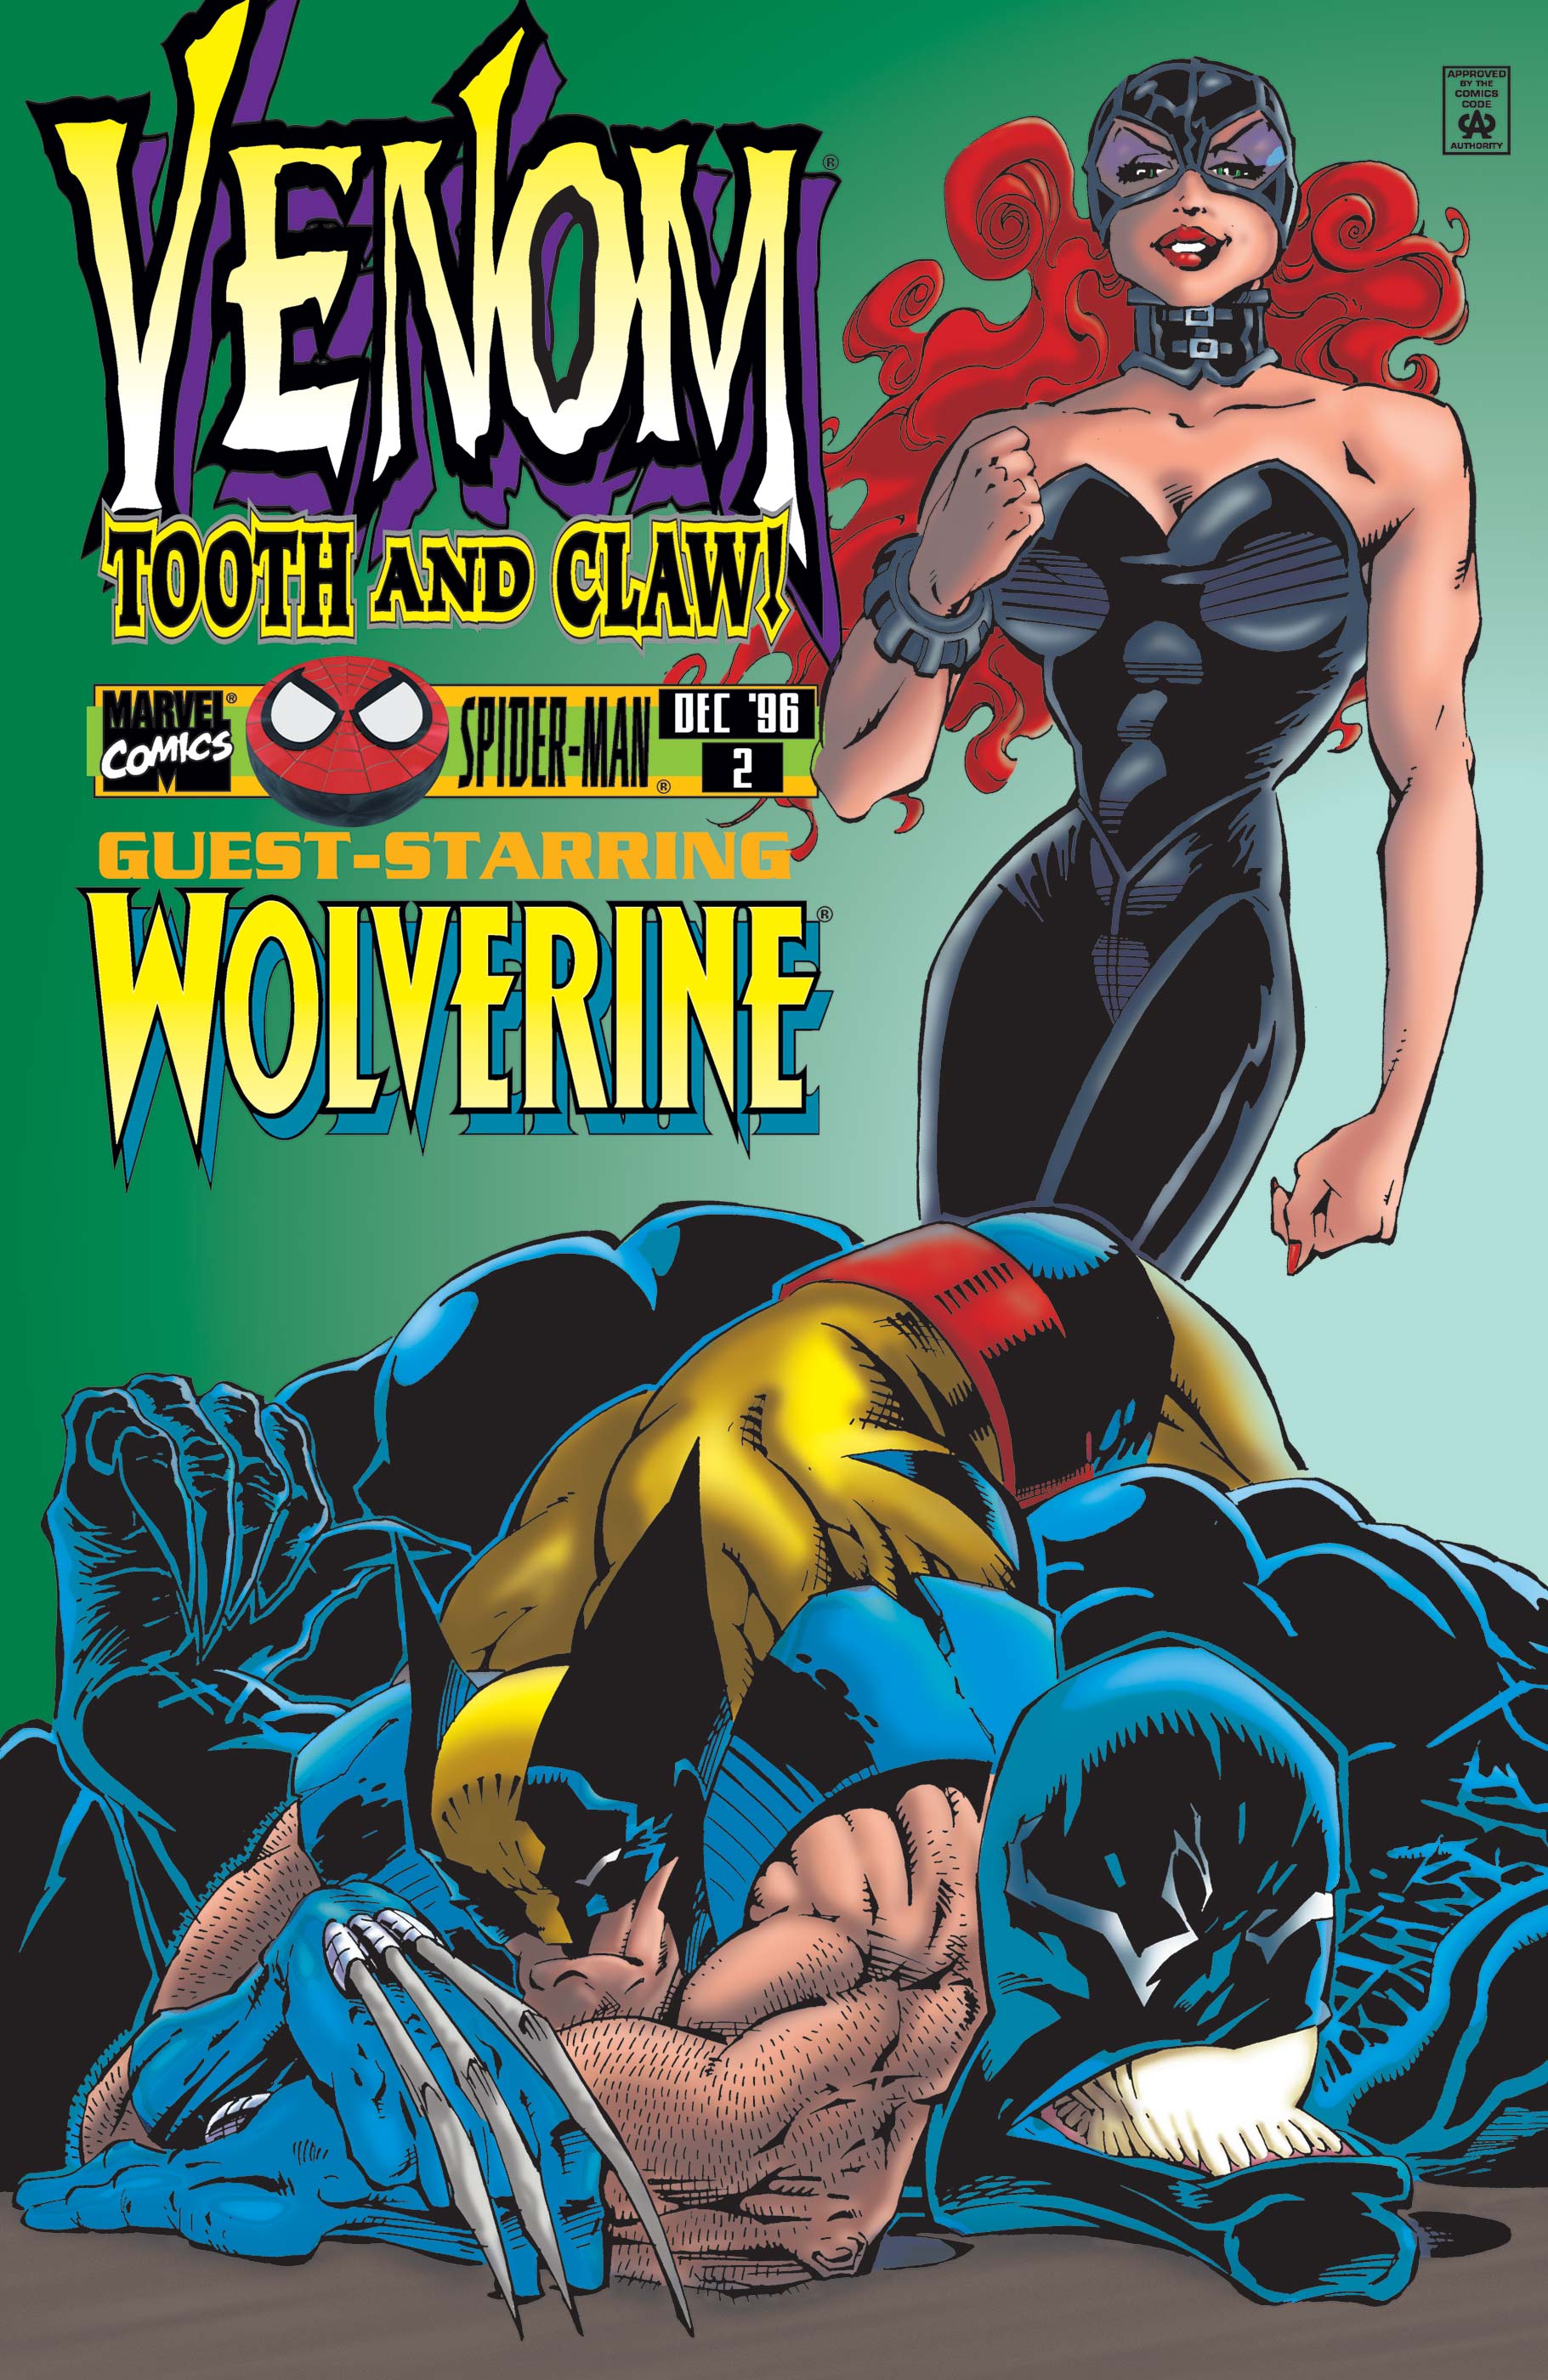 Venom: Tooth and Claw (1996) #2